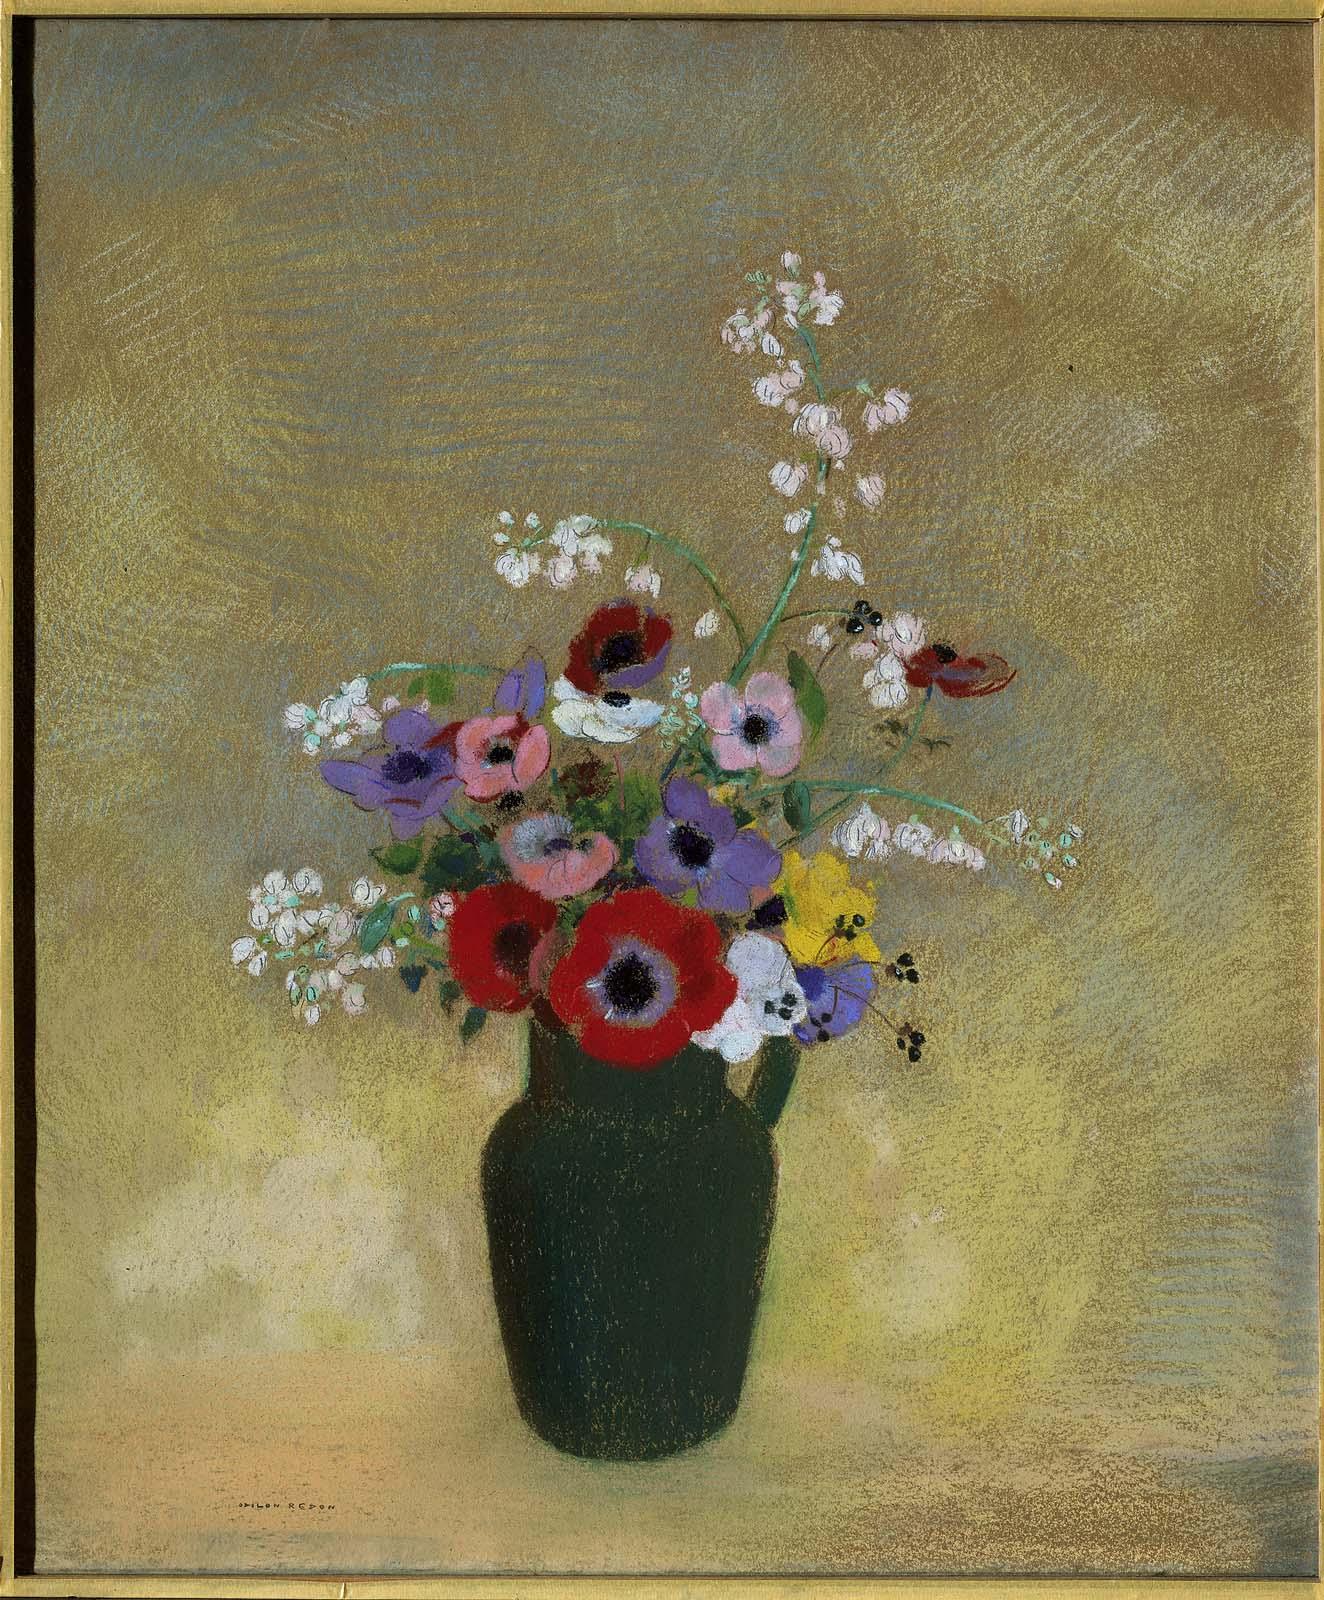 Large Green Vase with Mixed Flowers by Odilon Redon - 1910-1912 - 74.3 x 62.2 cm Museum of Fine Arts Boston